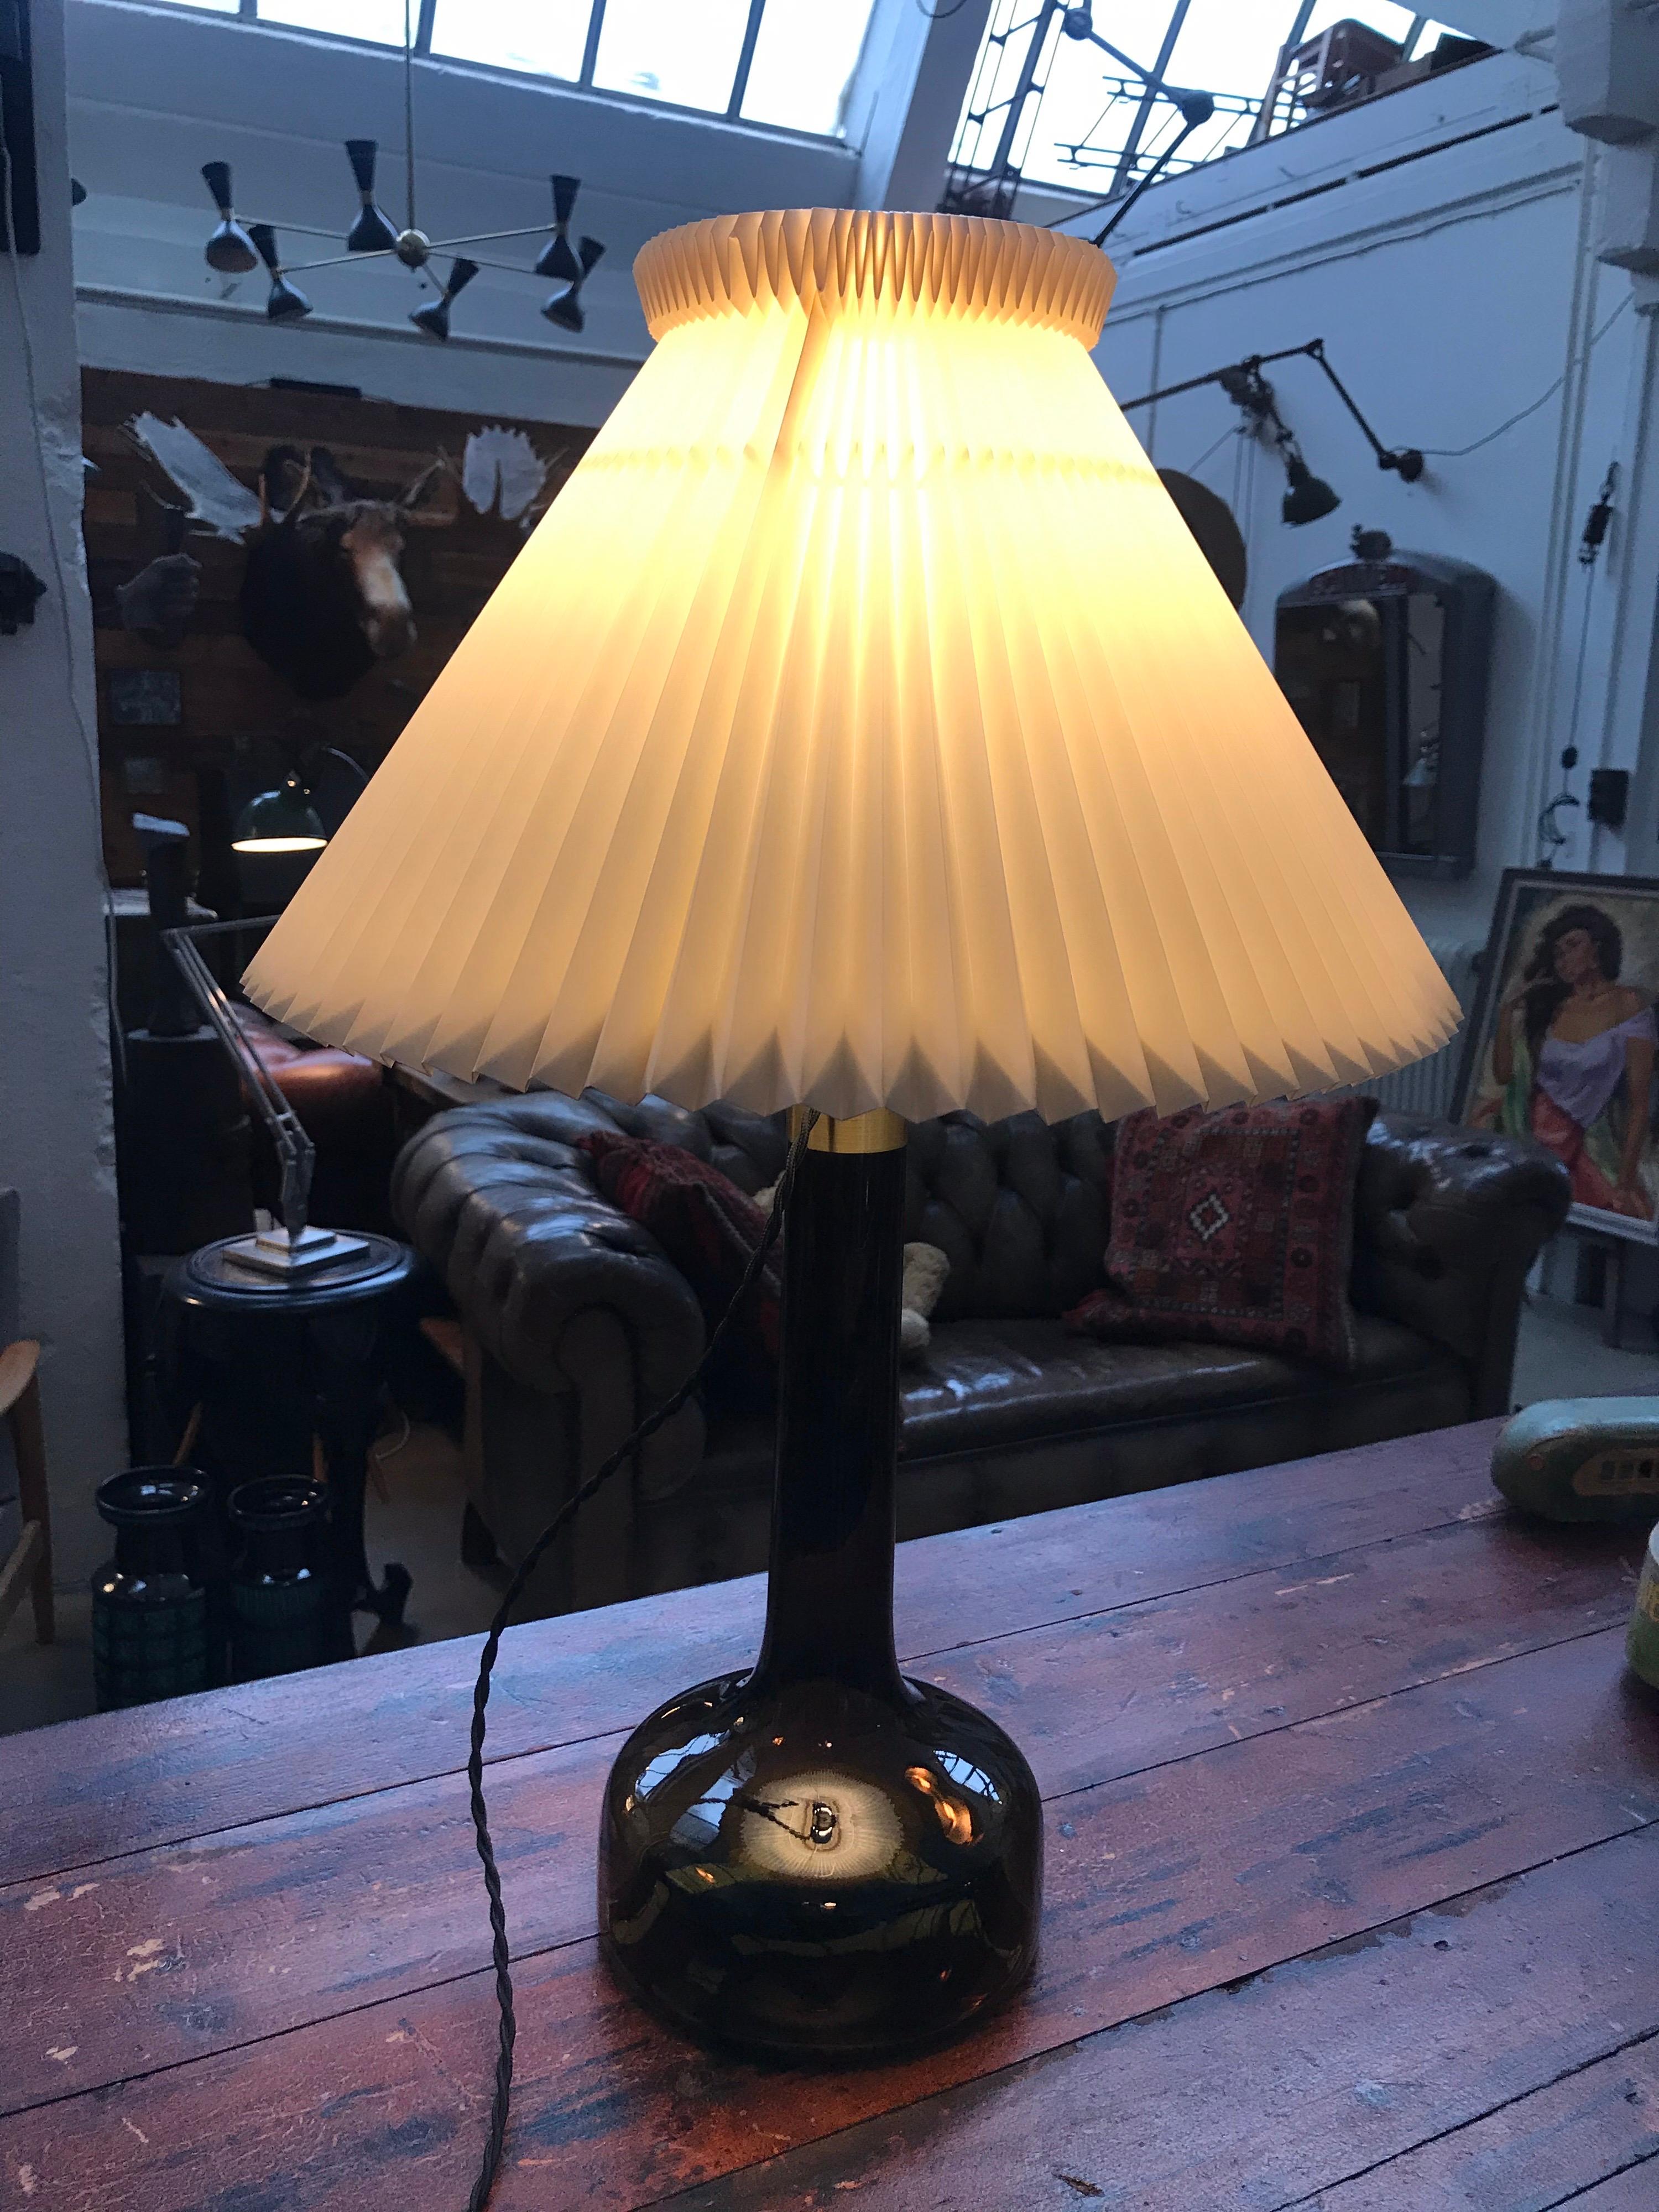 Vintage Danish table lamp by Holmegaard in brown glass with a handmade Le Klint shade.
In great vintage condition with just normal wear to the shade but no cracks or chips.
A Classic midcentury Danish design with great presence.